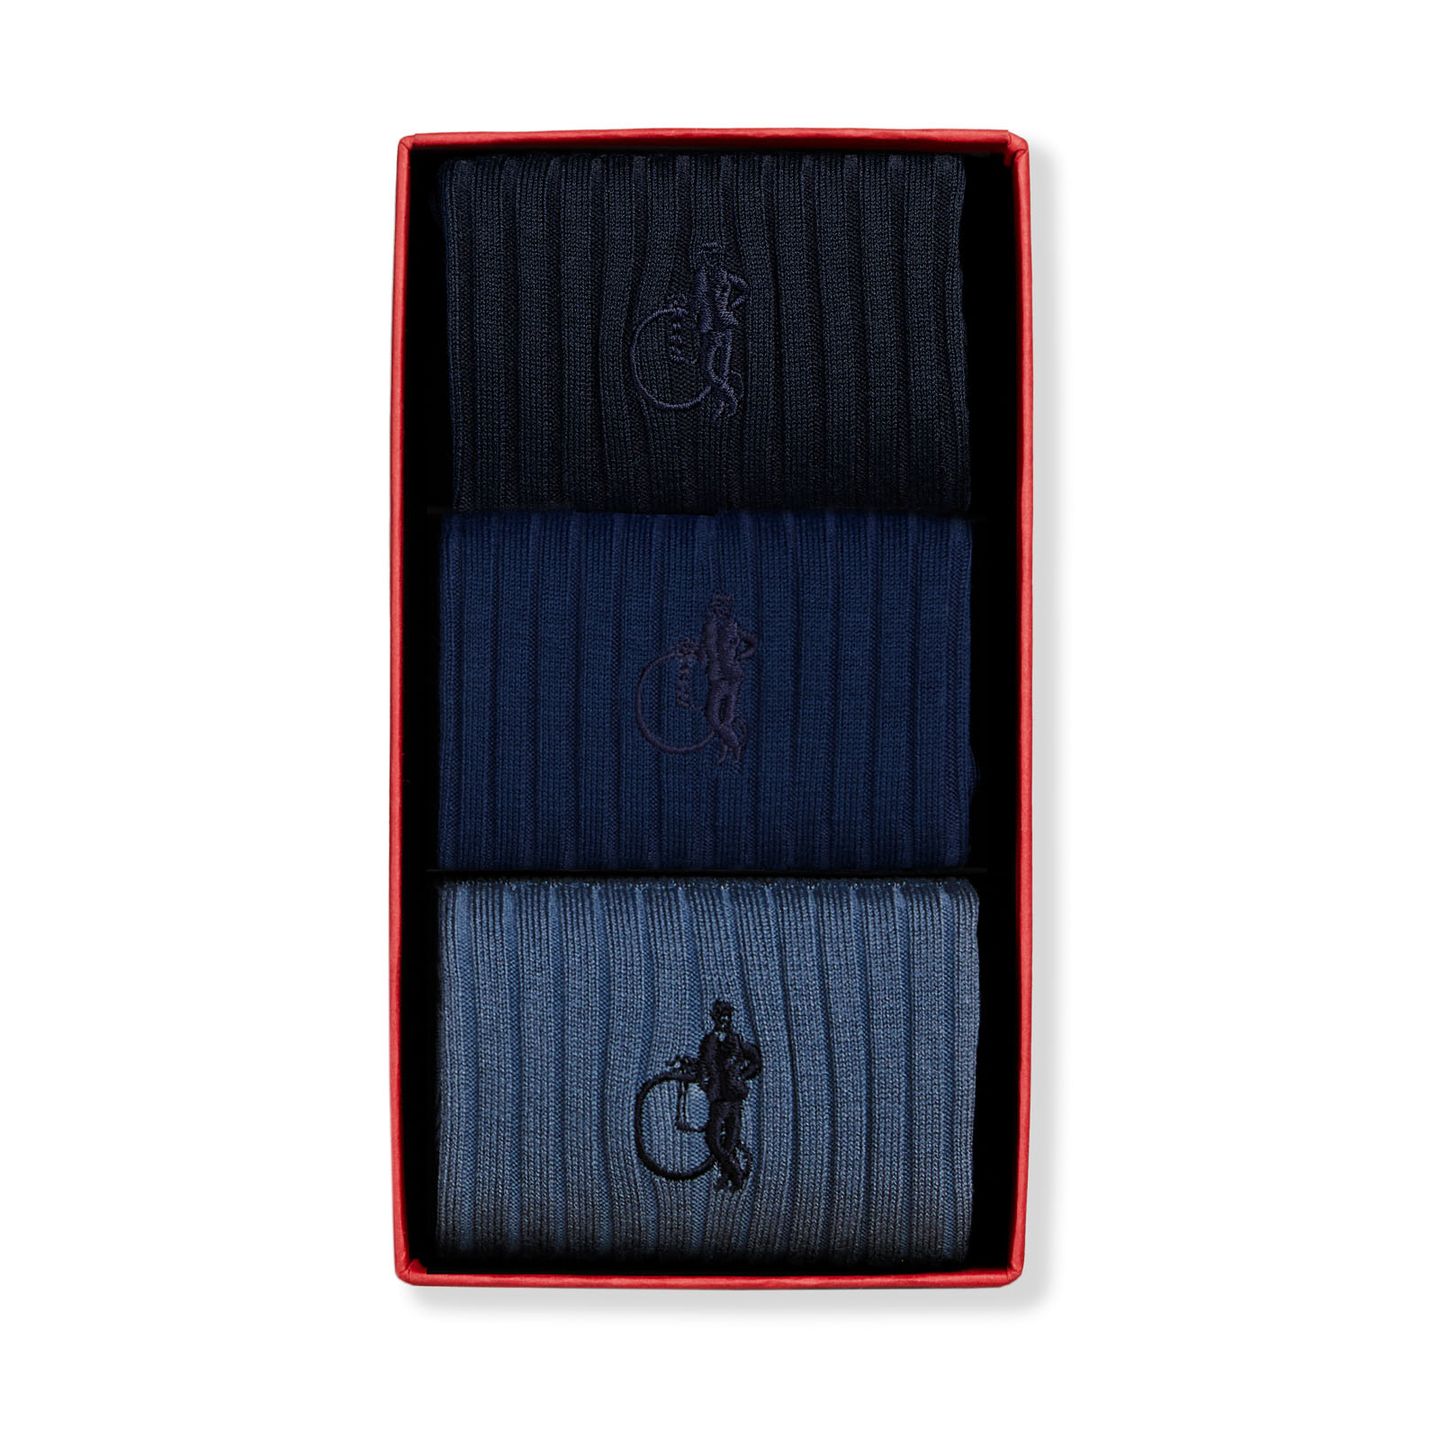 3 pair of simply blues sock collection in a box